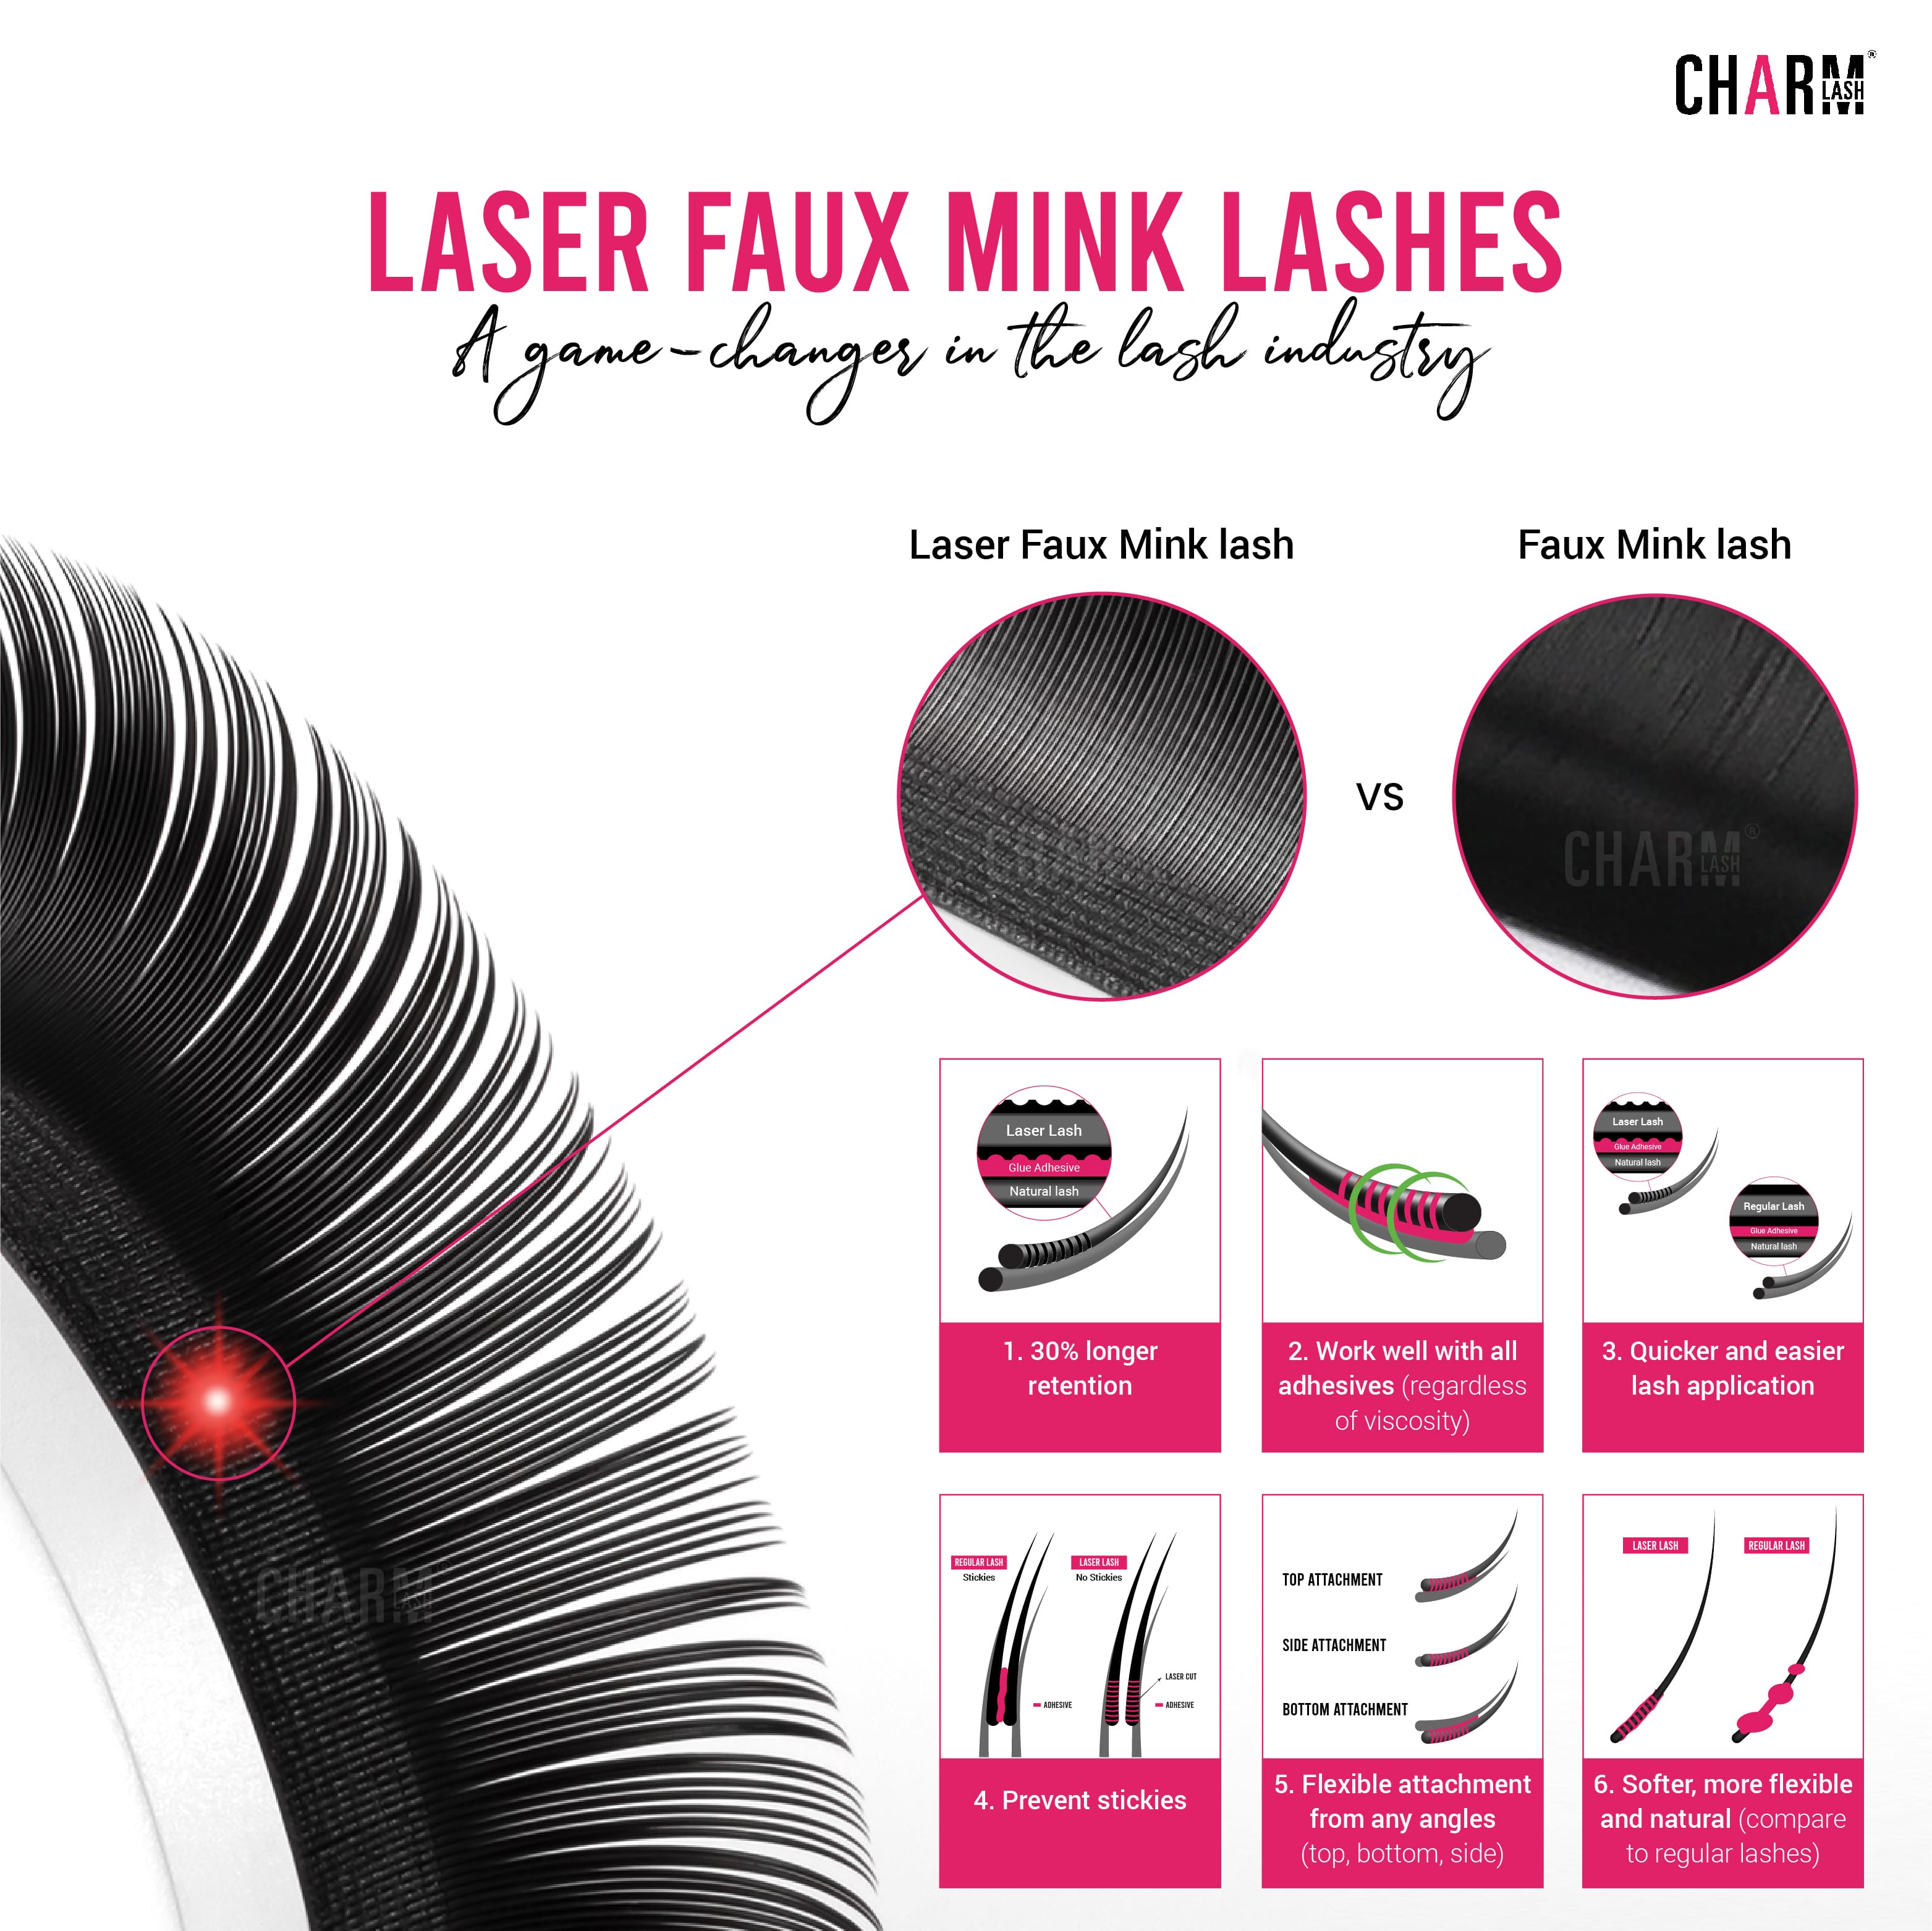 introducing laser faux mink lashes